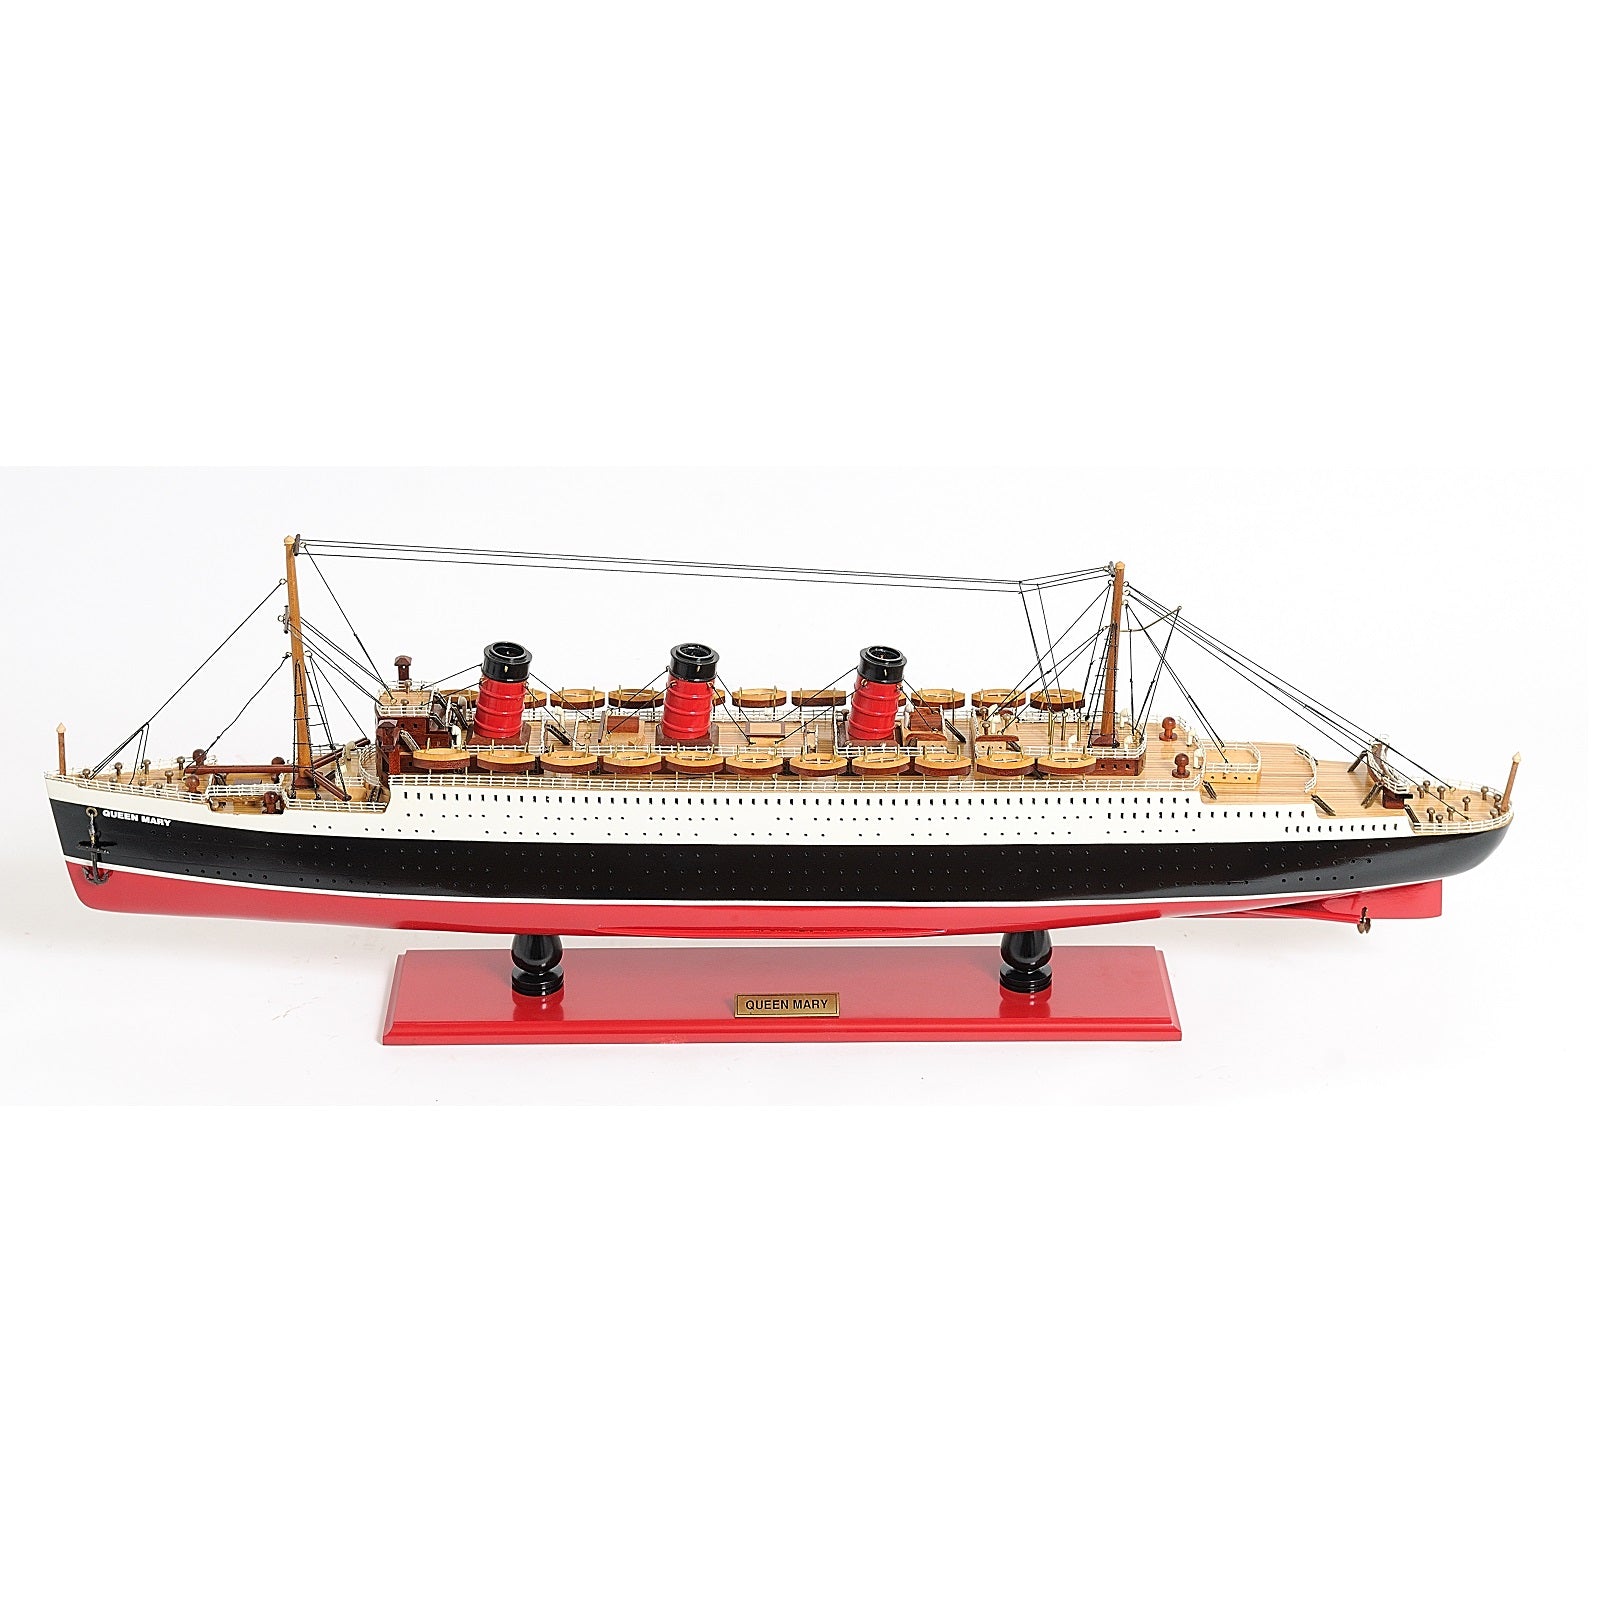 Queen Mary Large, Fully Assembled